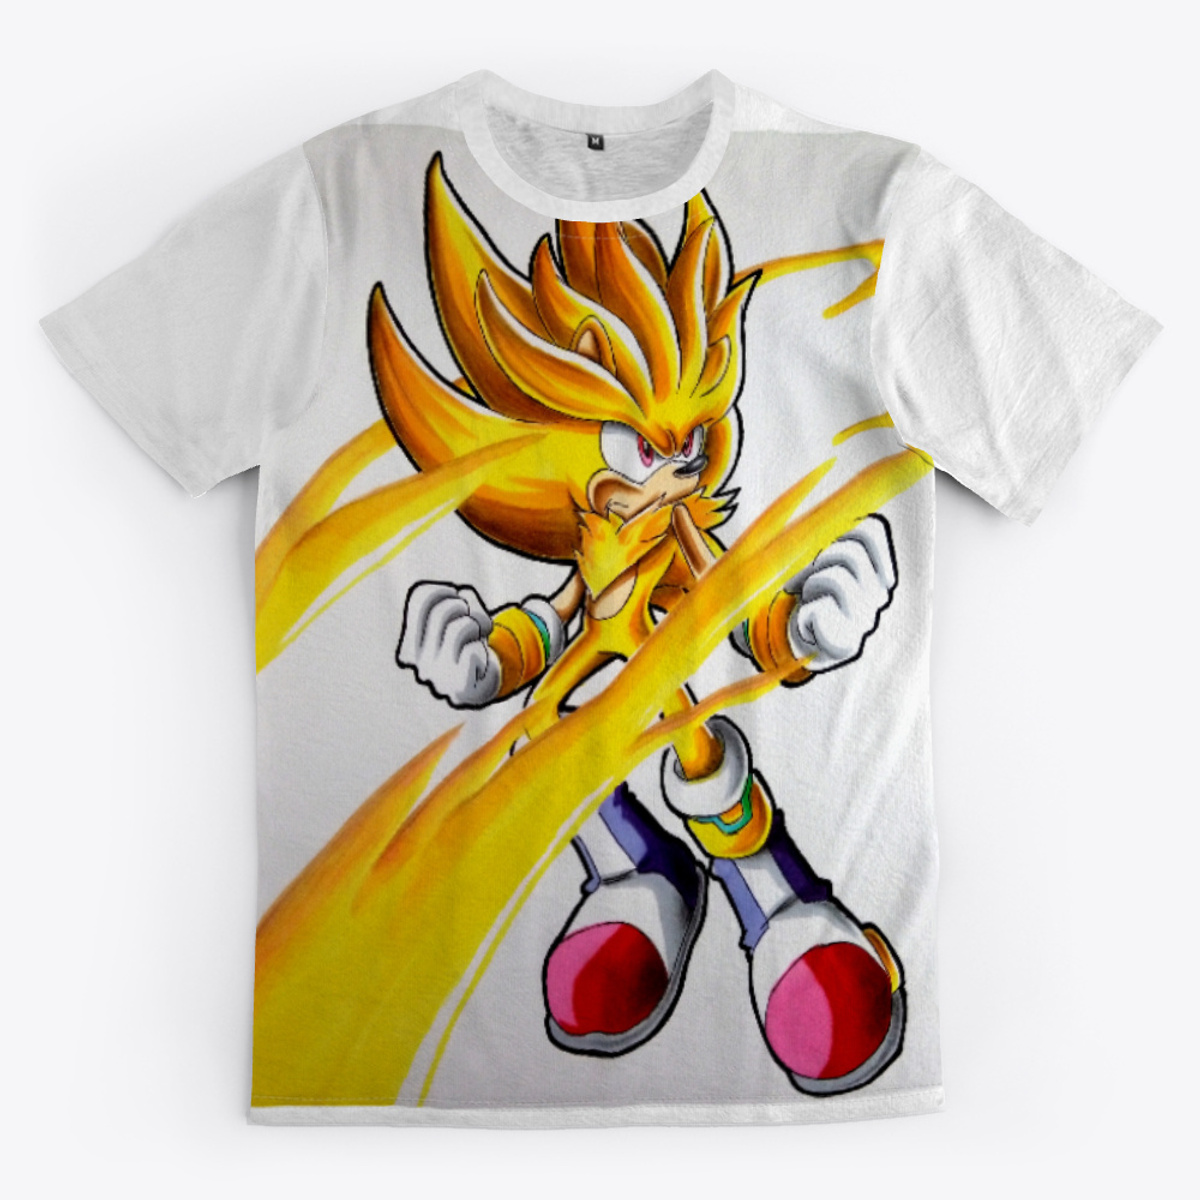 Super Sonic + Super Silver Fusion Mask Products from grunty art